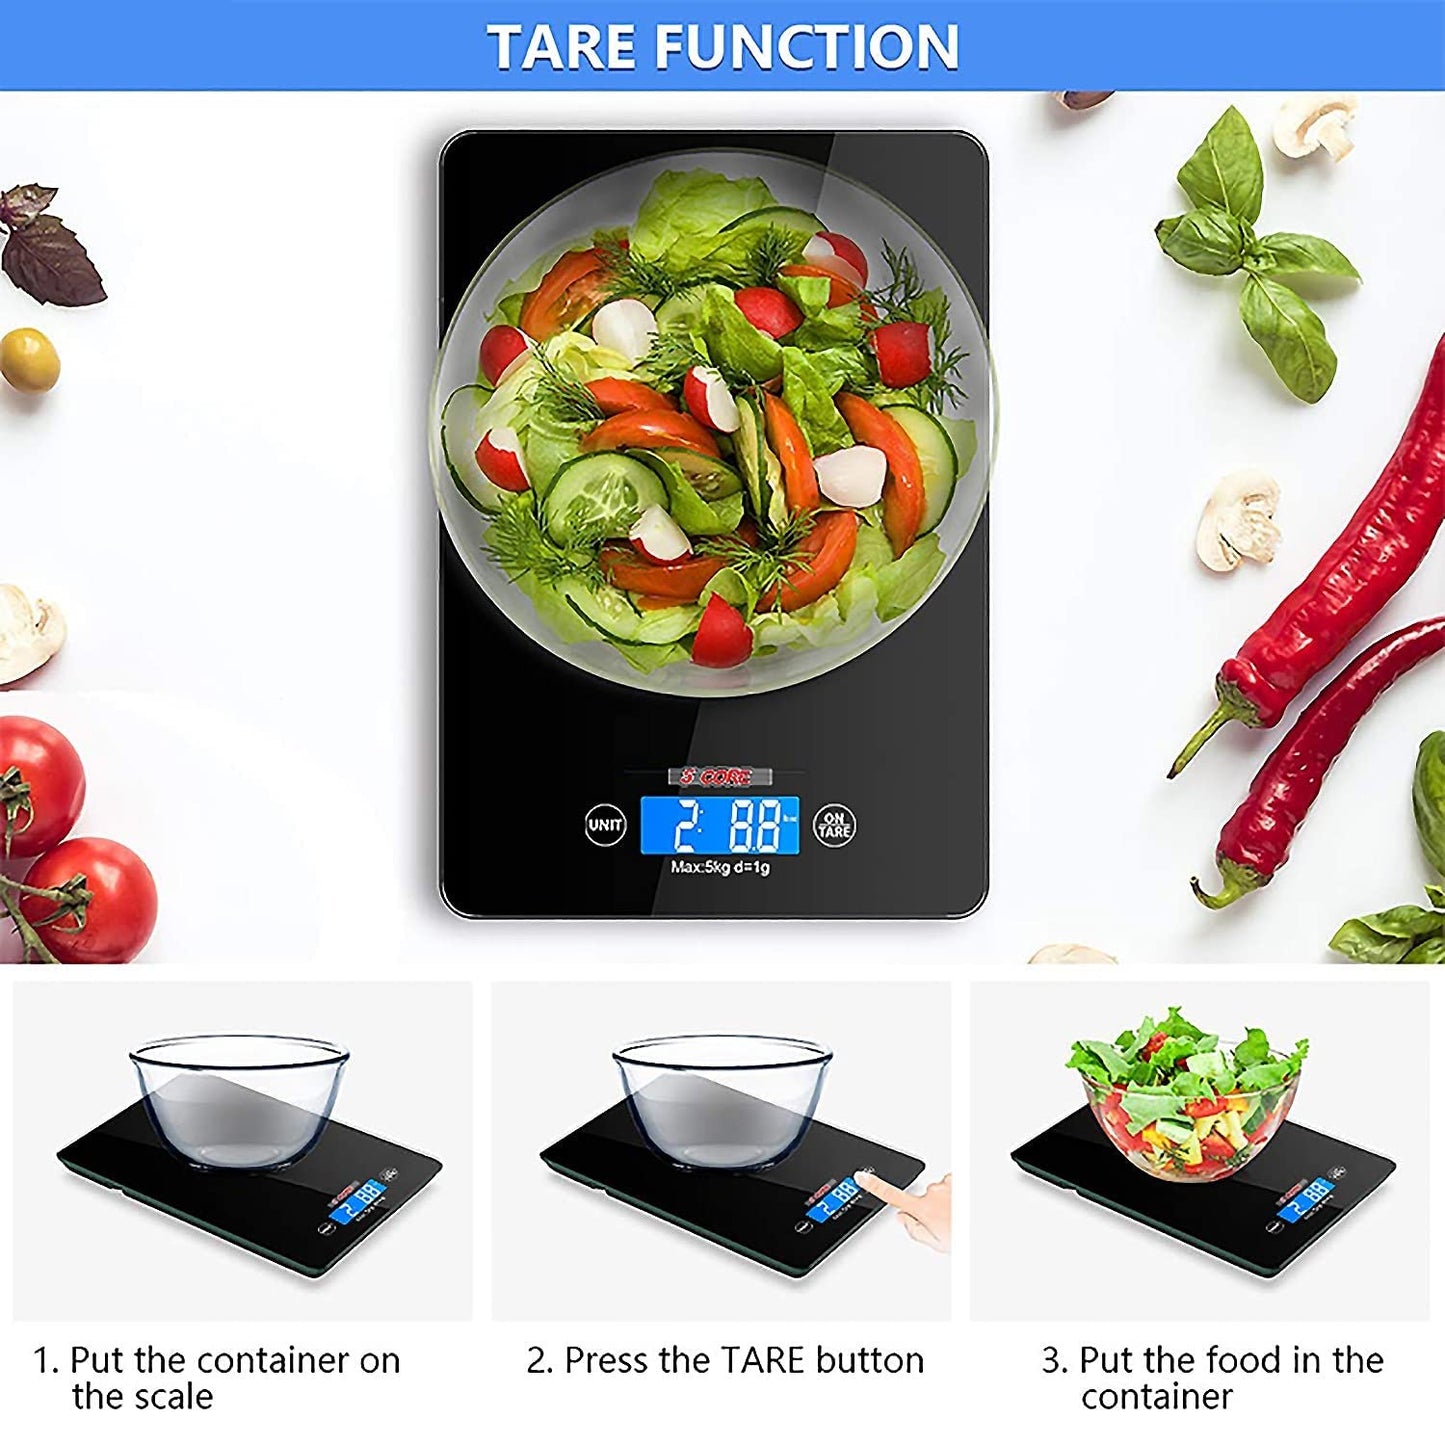 Food Kitchen Scale with LCD Display/ Durable Digital Scale with KG, LB, GM & OZ Unit Conversion/ Ideal for Weight Loss, Baking, Cooking, Keto, and Meal Prep/ Battery Included- K 43